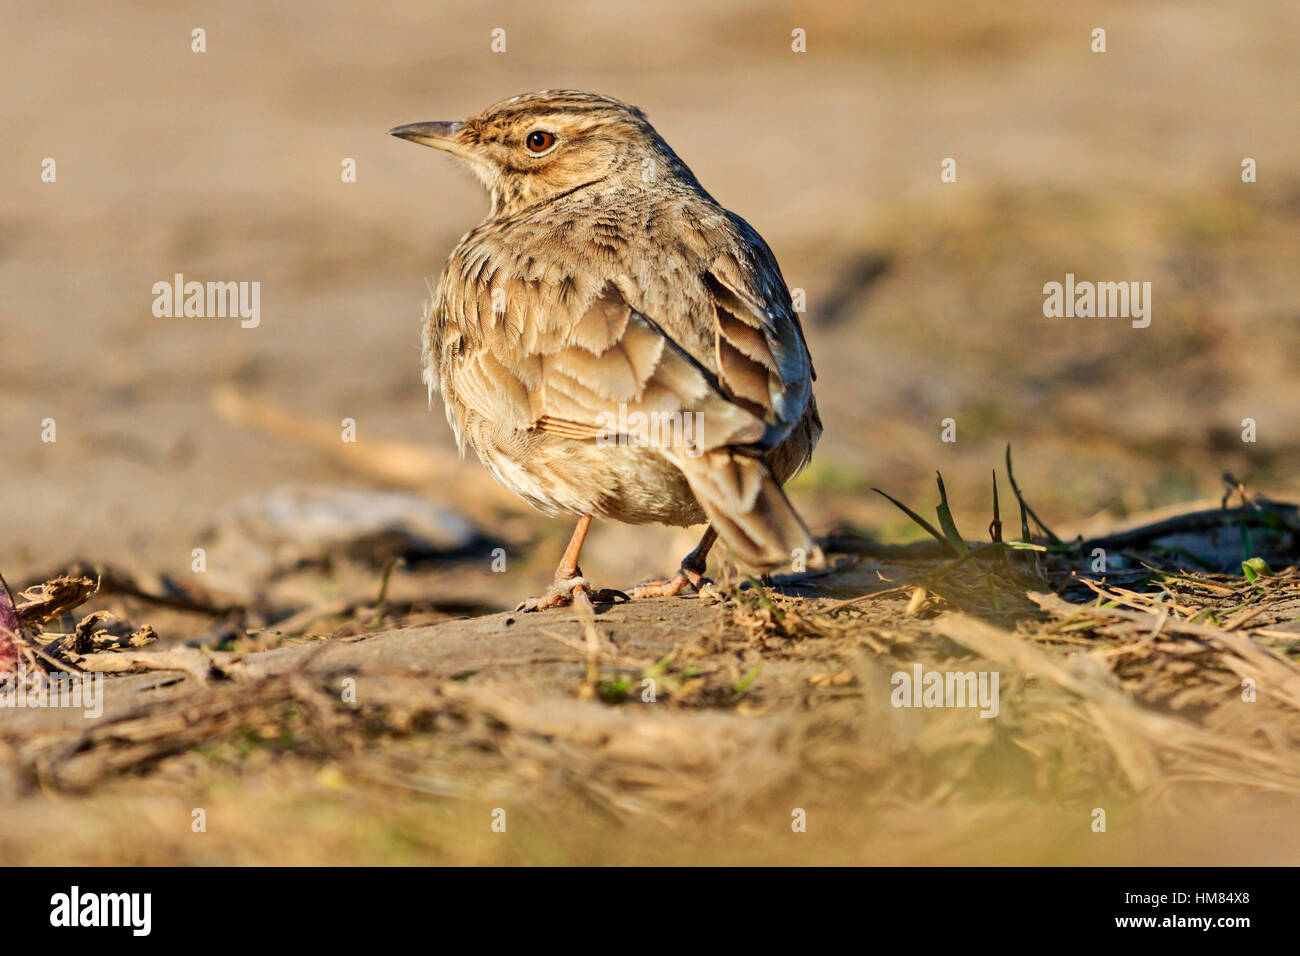 crest lark at sunset is among dry grass Stock Photo